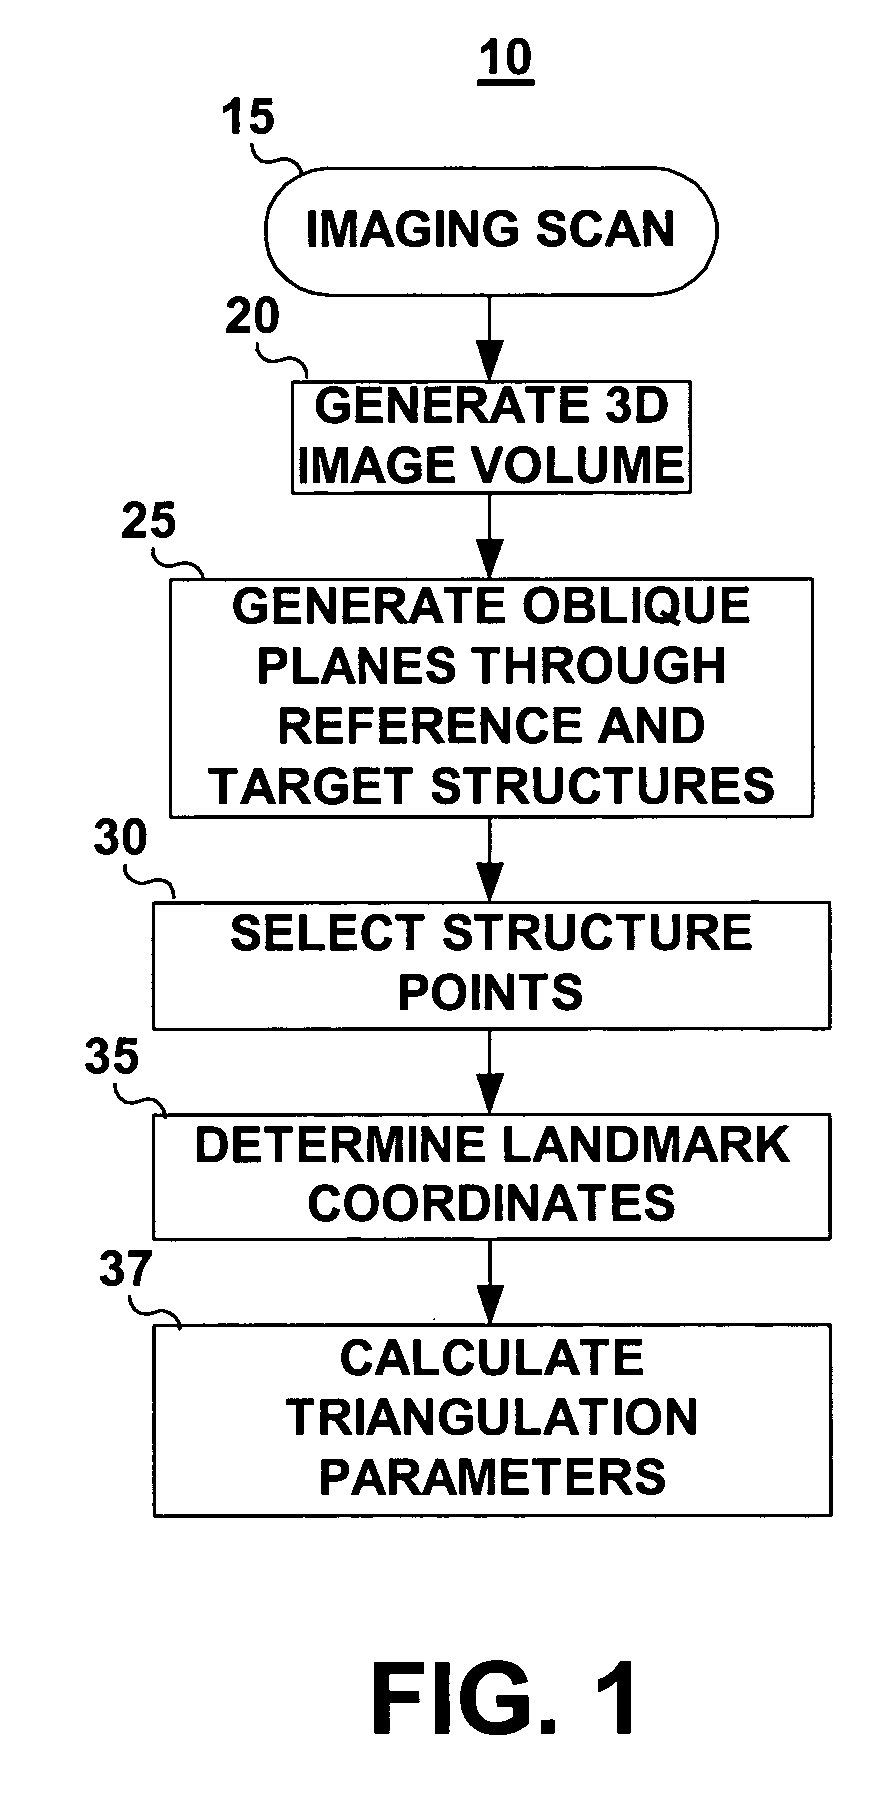 Clinical tool for structure localization